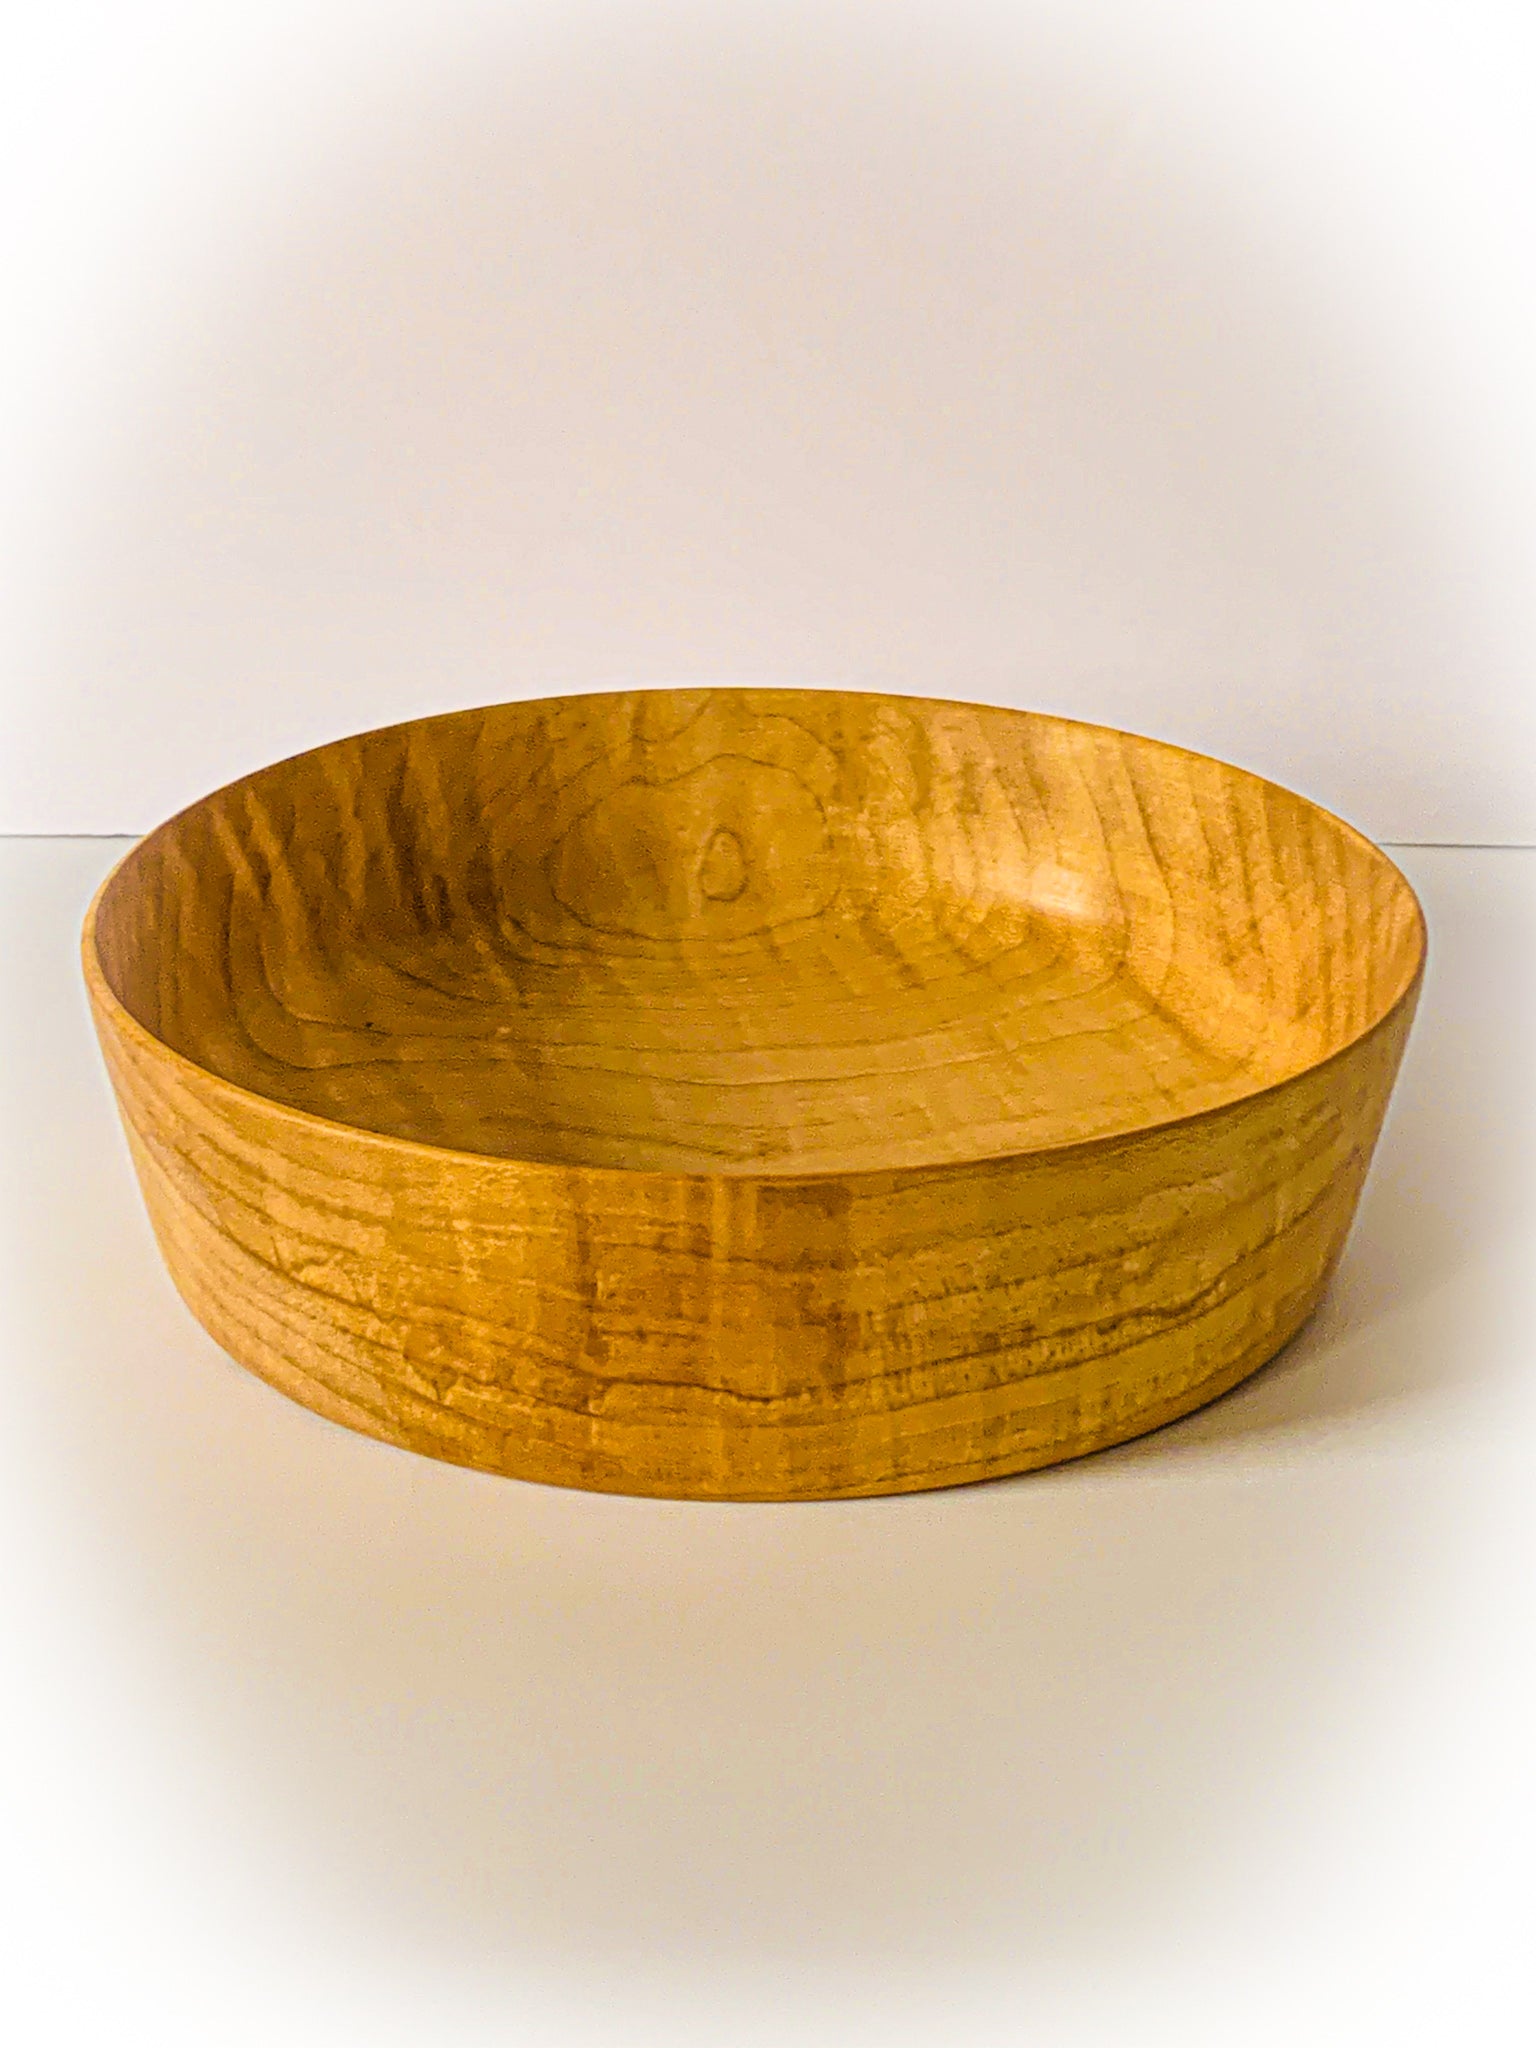 Highly Figured Maple Bowl